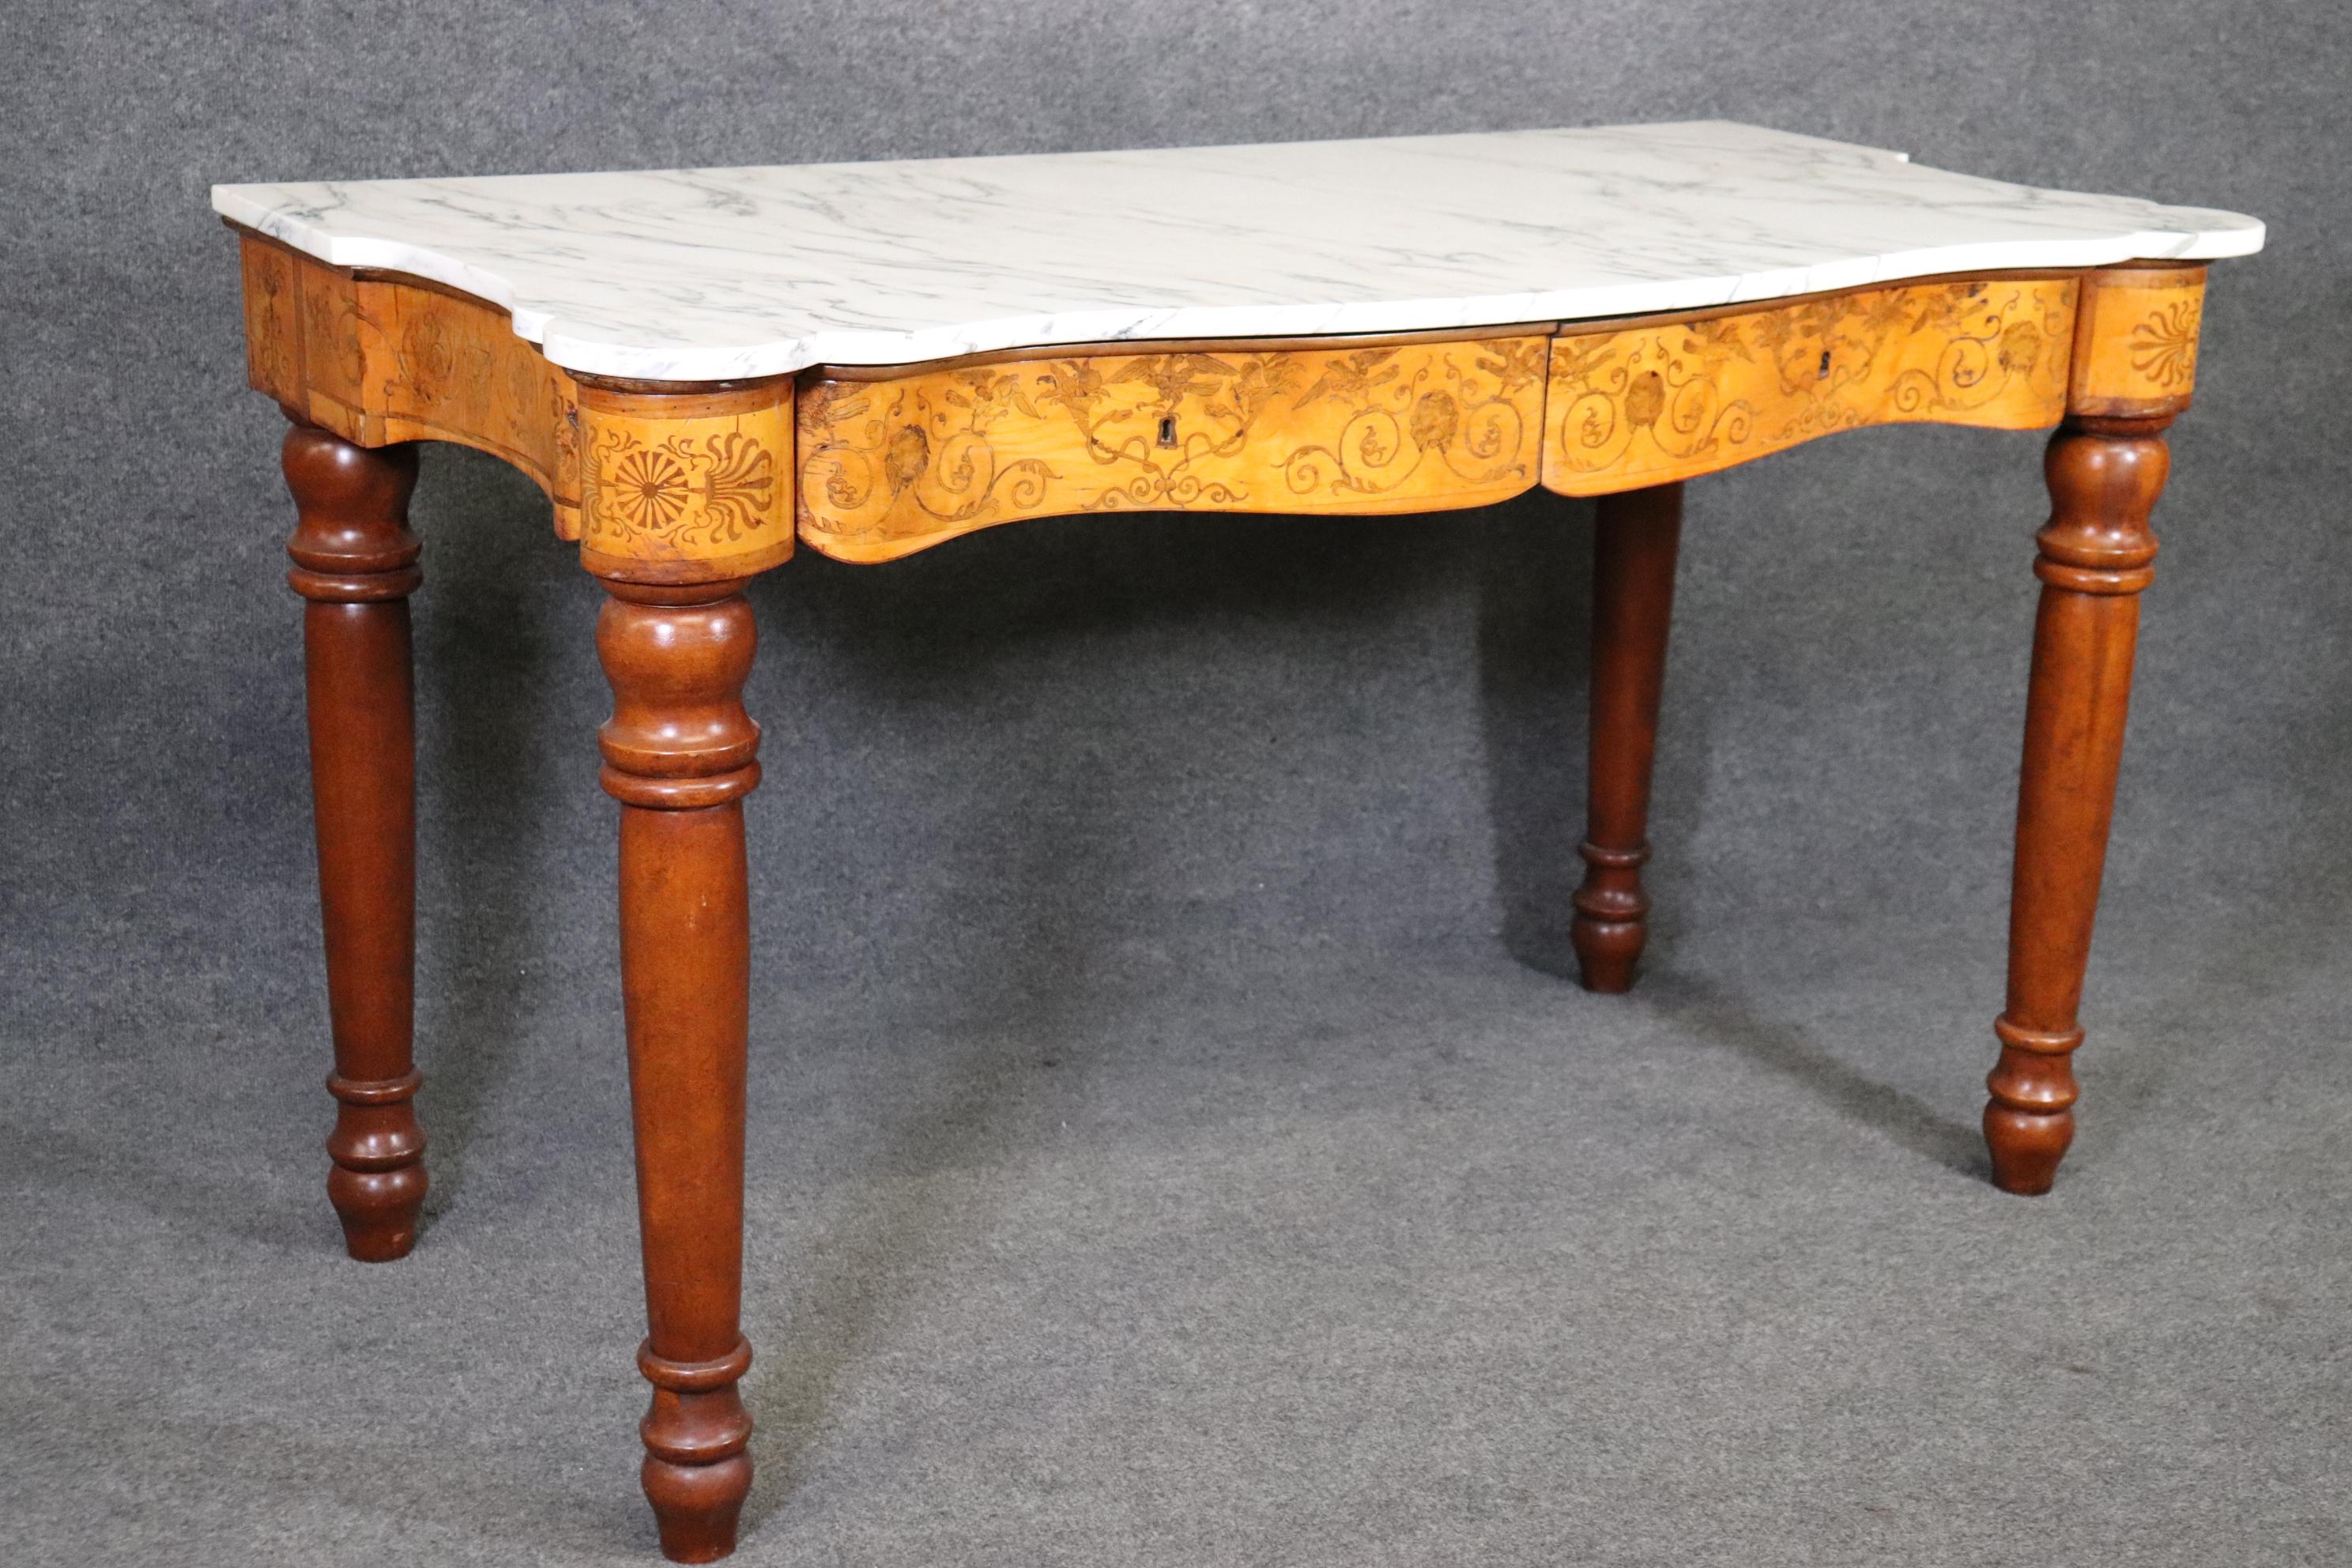 This is a very rare marble top pastry or pasta table made in Italy in the middle to later part of the 1800s. The table can be used as a desk or even as a kitchen island or serving table. perhaps as a console table. The table is in good condition